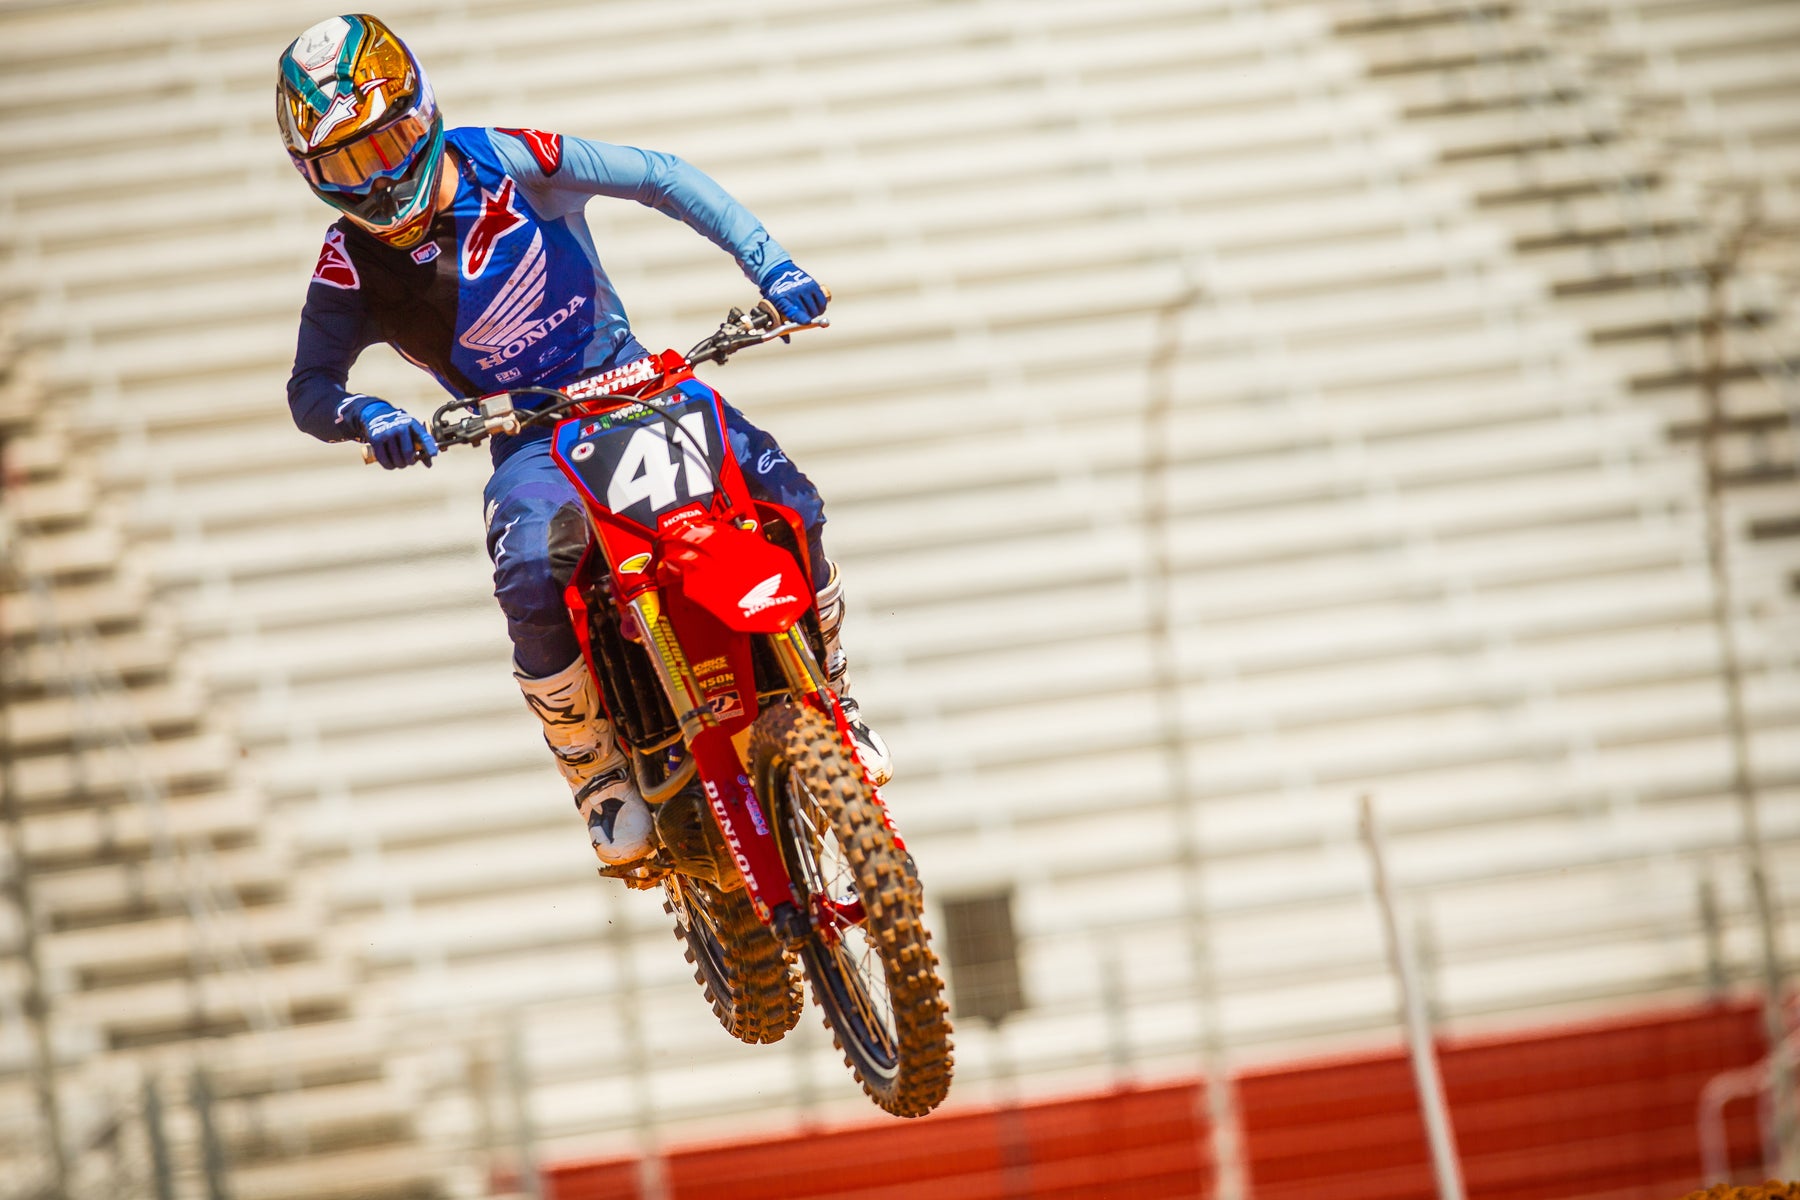 JUSTIN COOPER EDGES HUNTER LAWRENCE IN EPIC 250SX WEST RACE SHOWDOWN AT ATLANTA 2